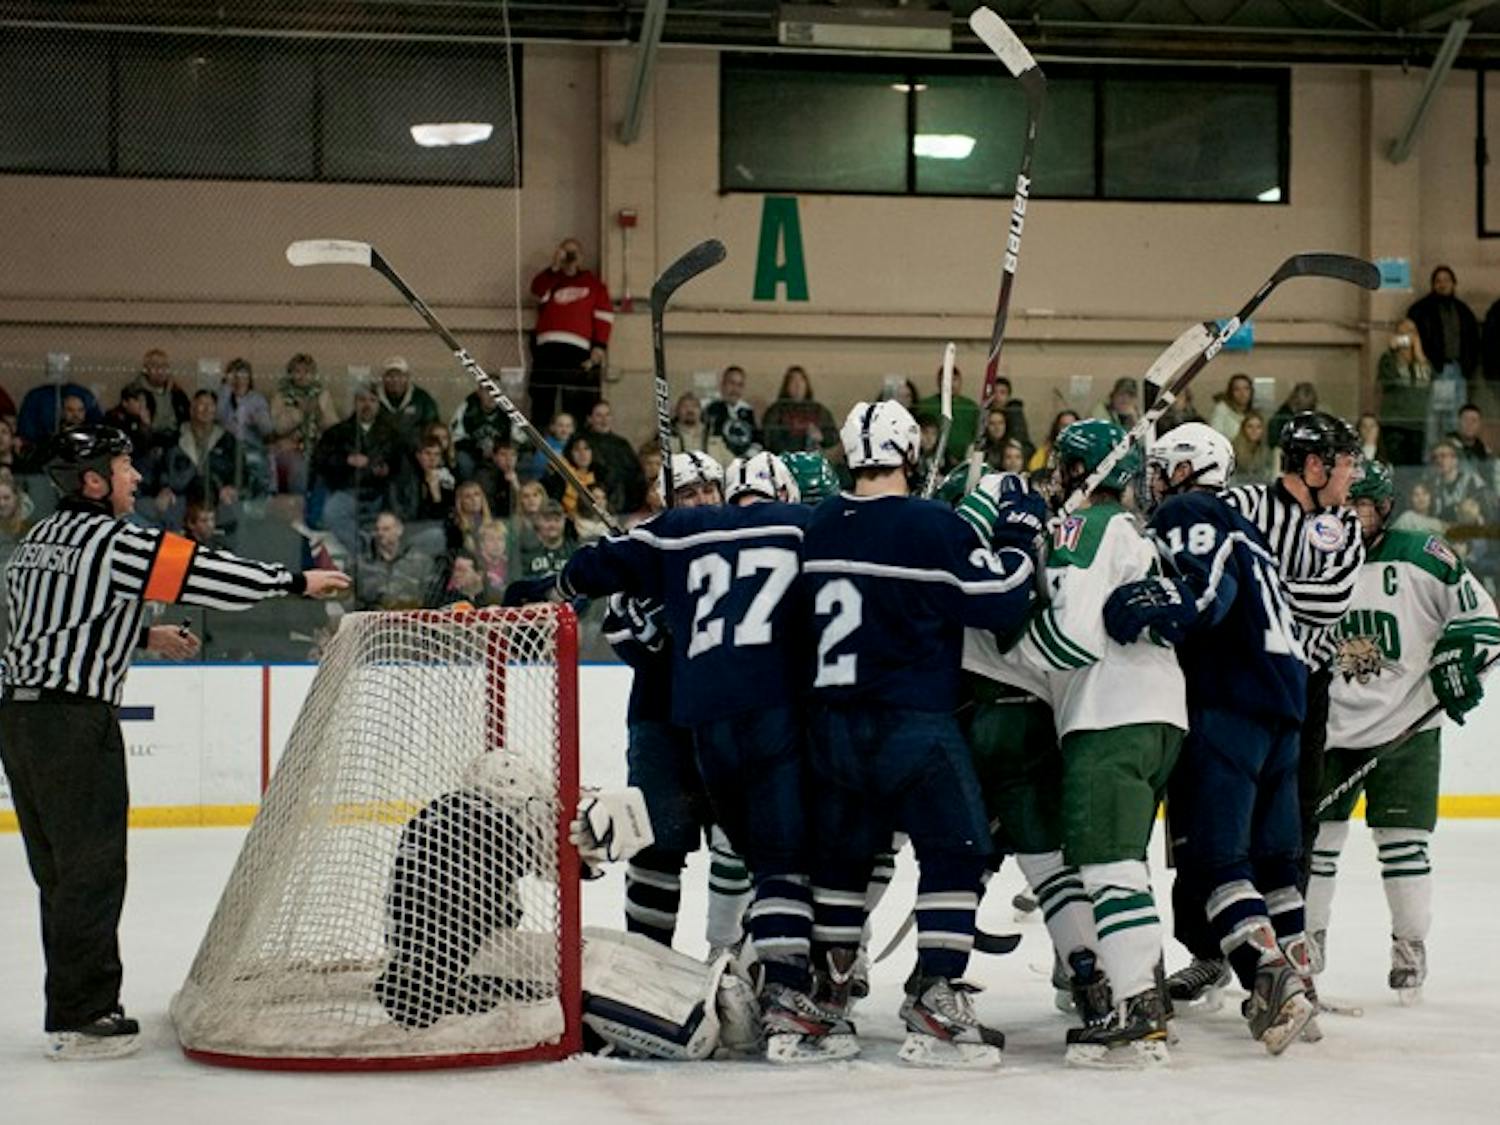 Hockey: Penn State frustrates Ohio attack, sweeps final series  